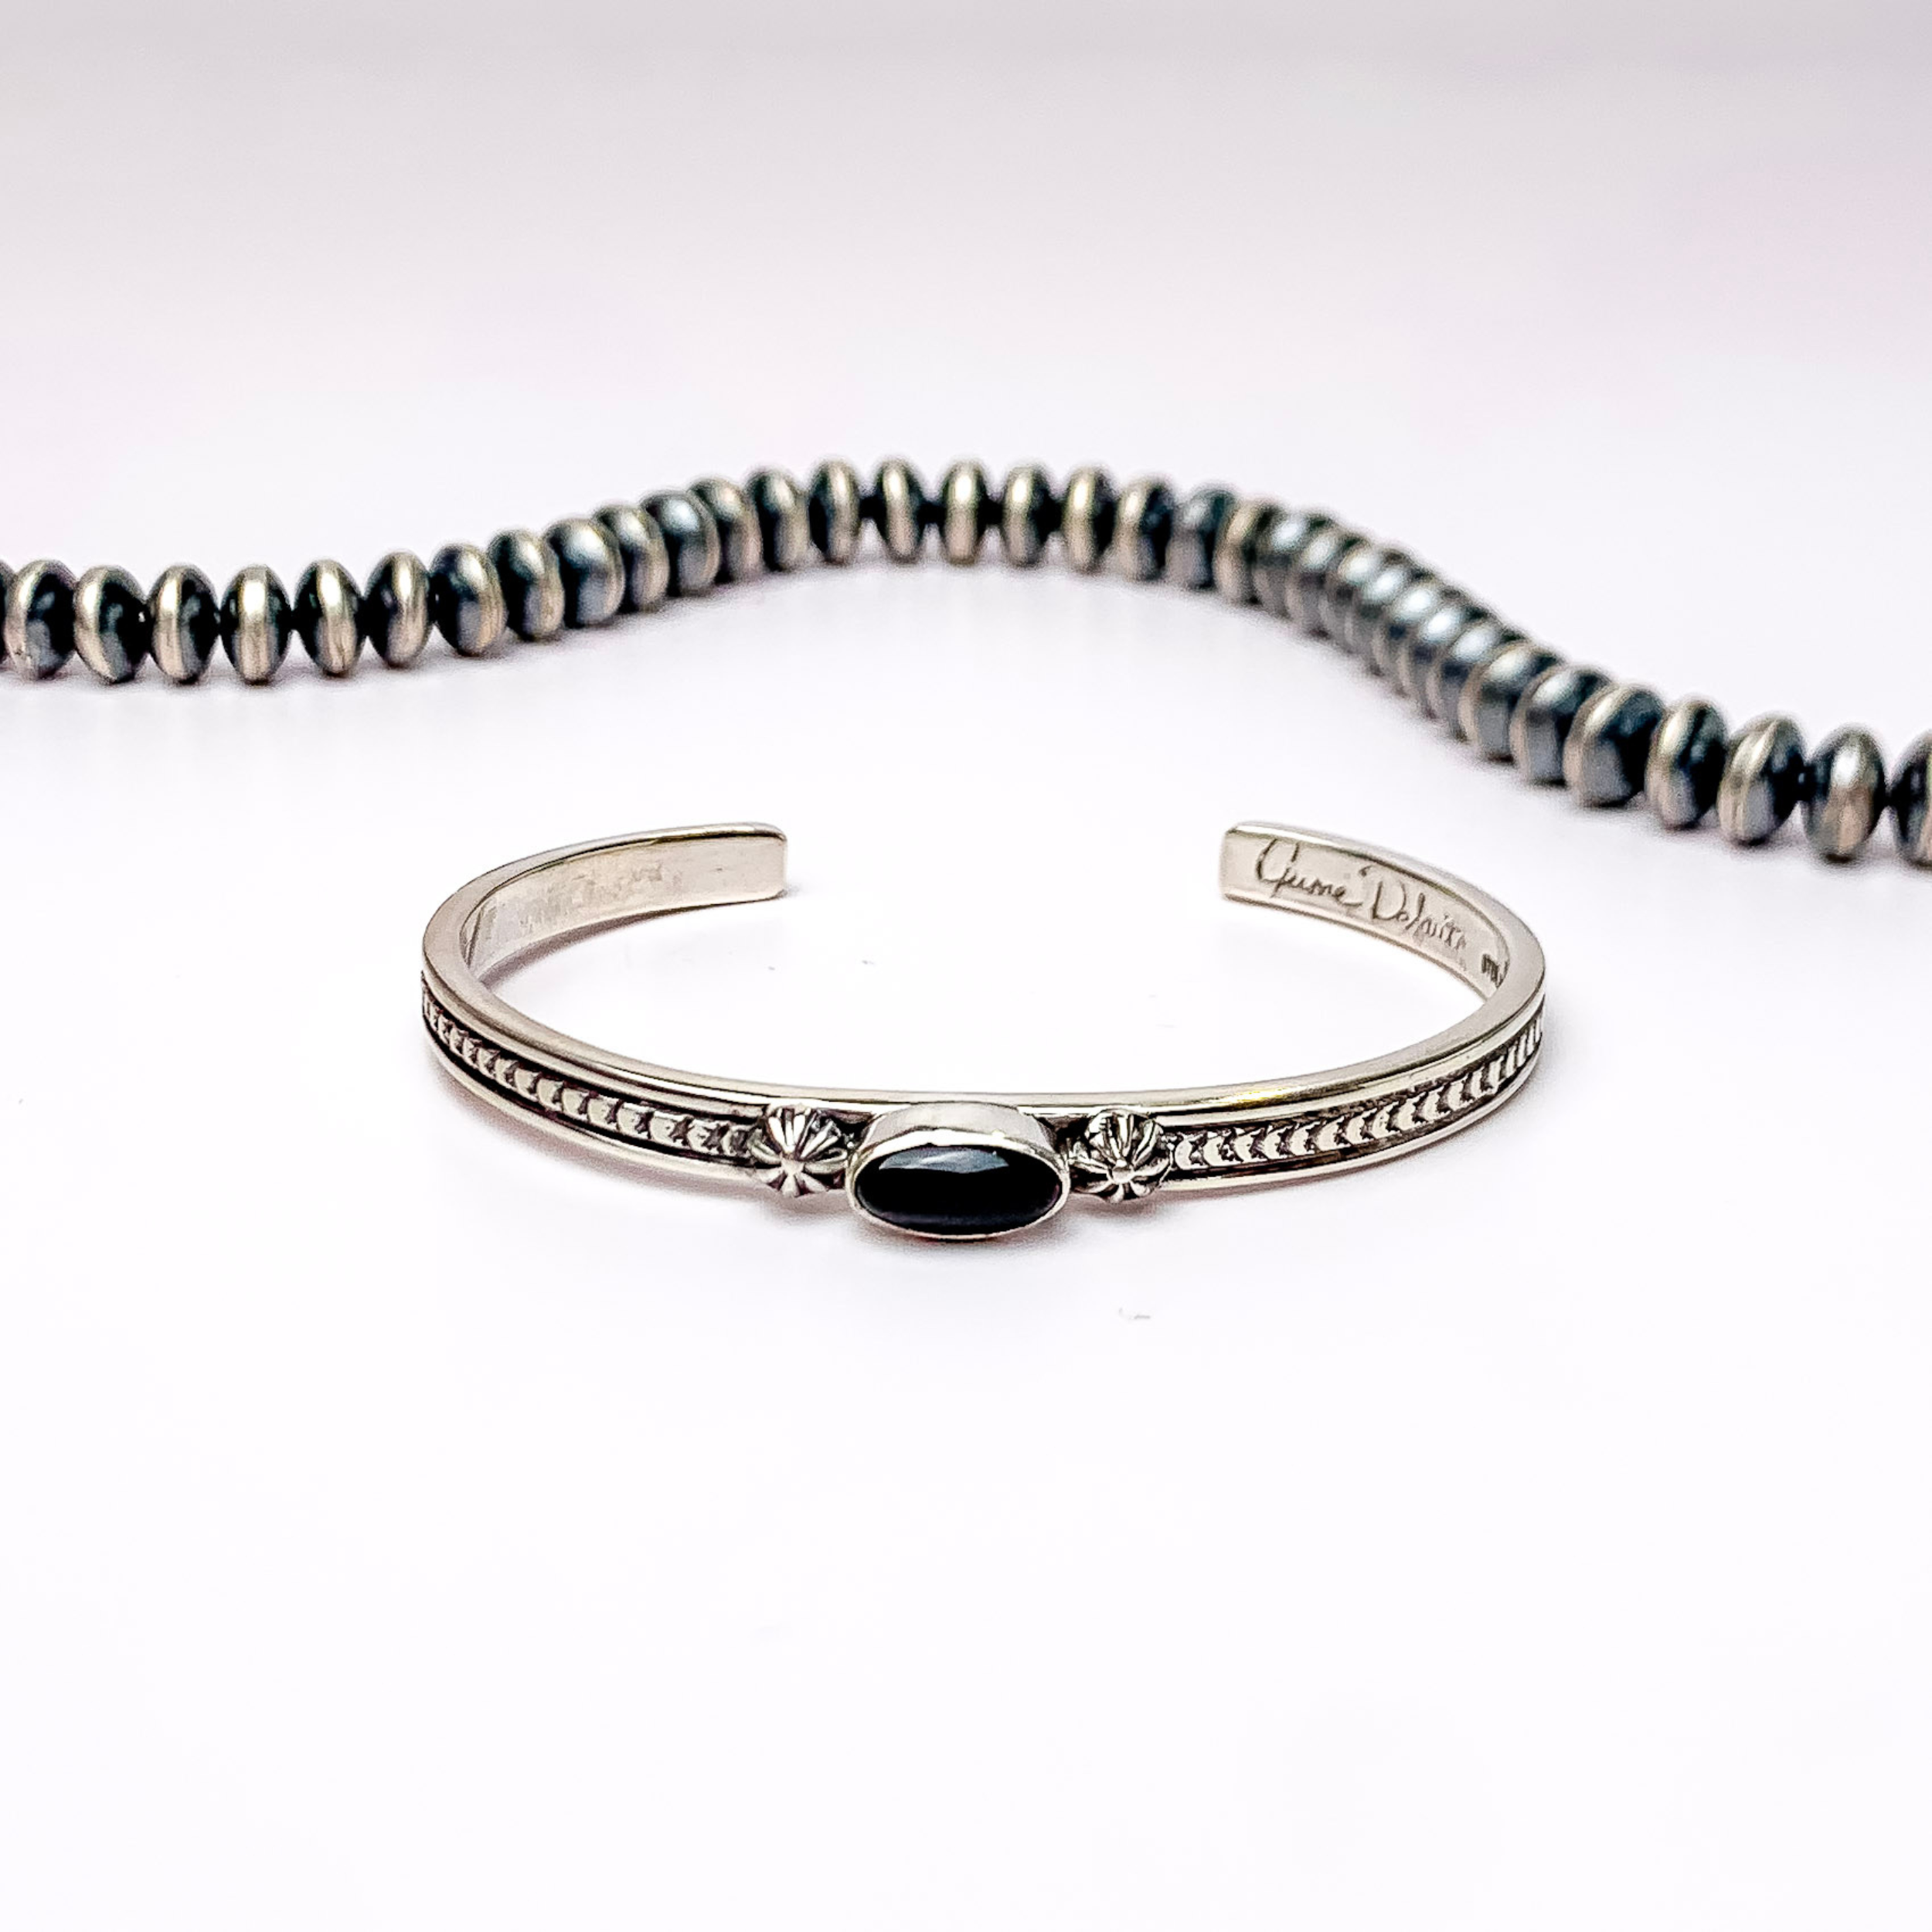 Centered in the picture is a sterling silver braclet with a black stone in the middle with a white background.